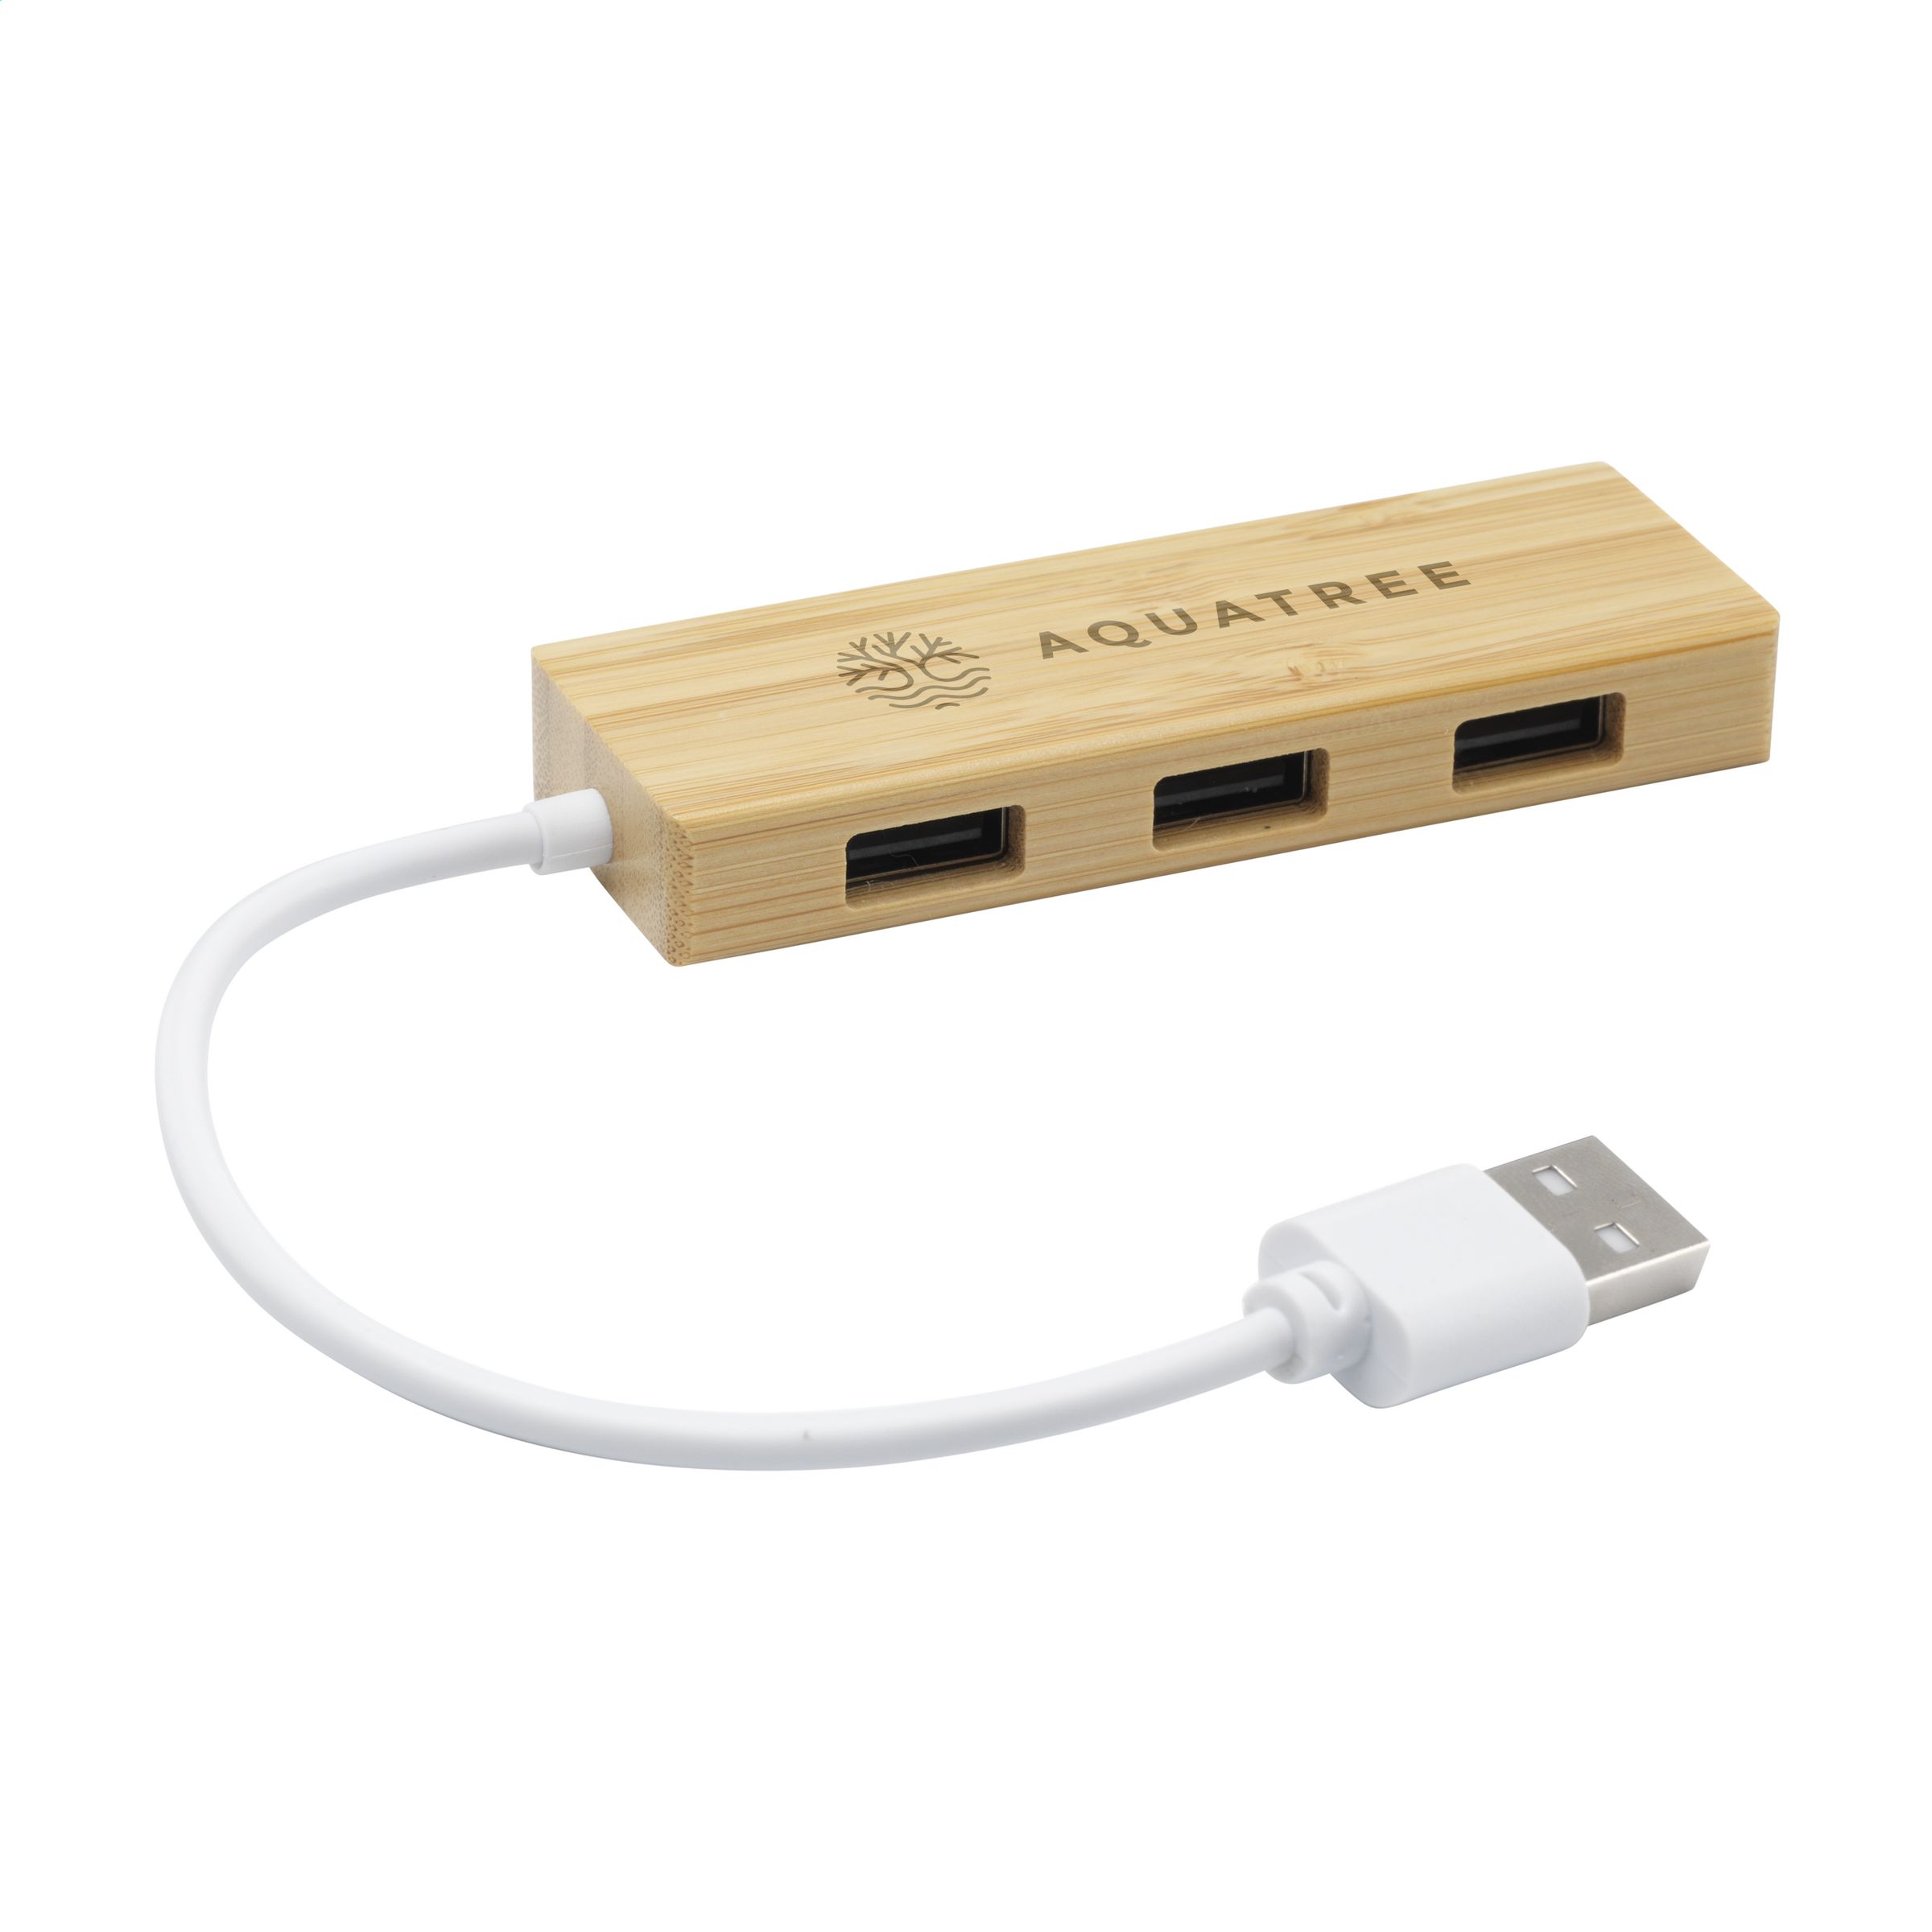 Bamboo USB Hub - Chalfont St Peter - Castle Bromwich